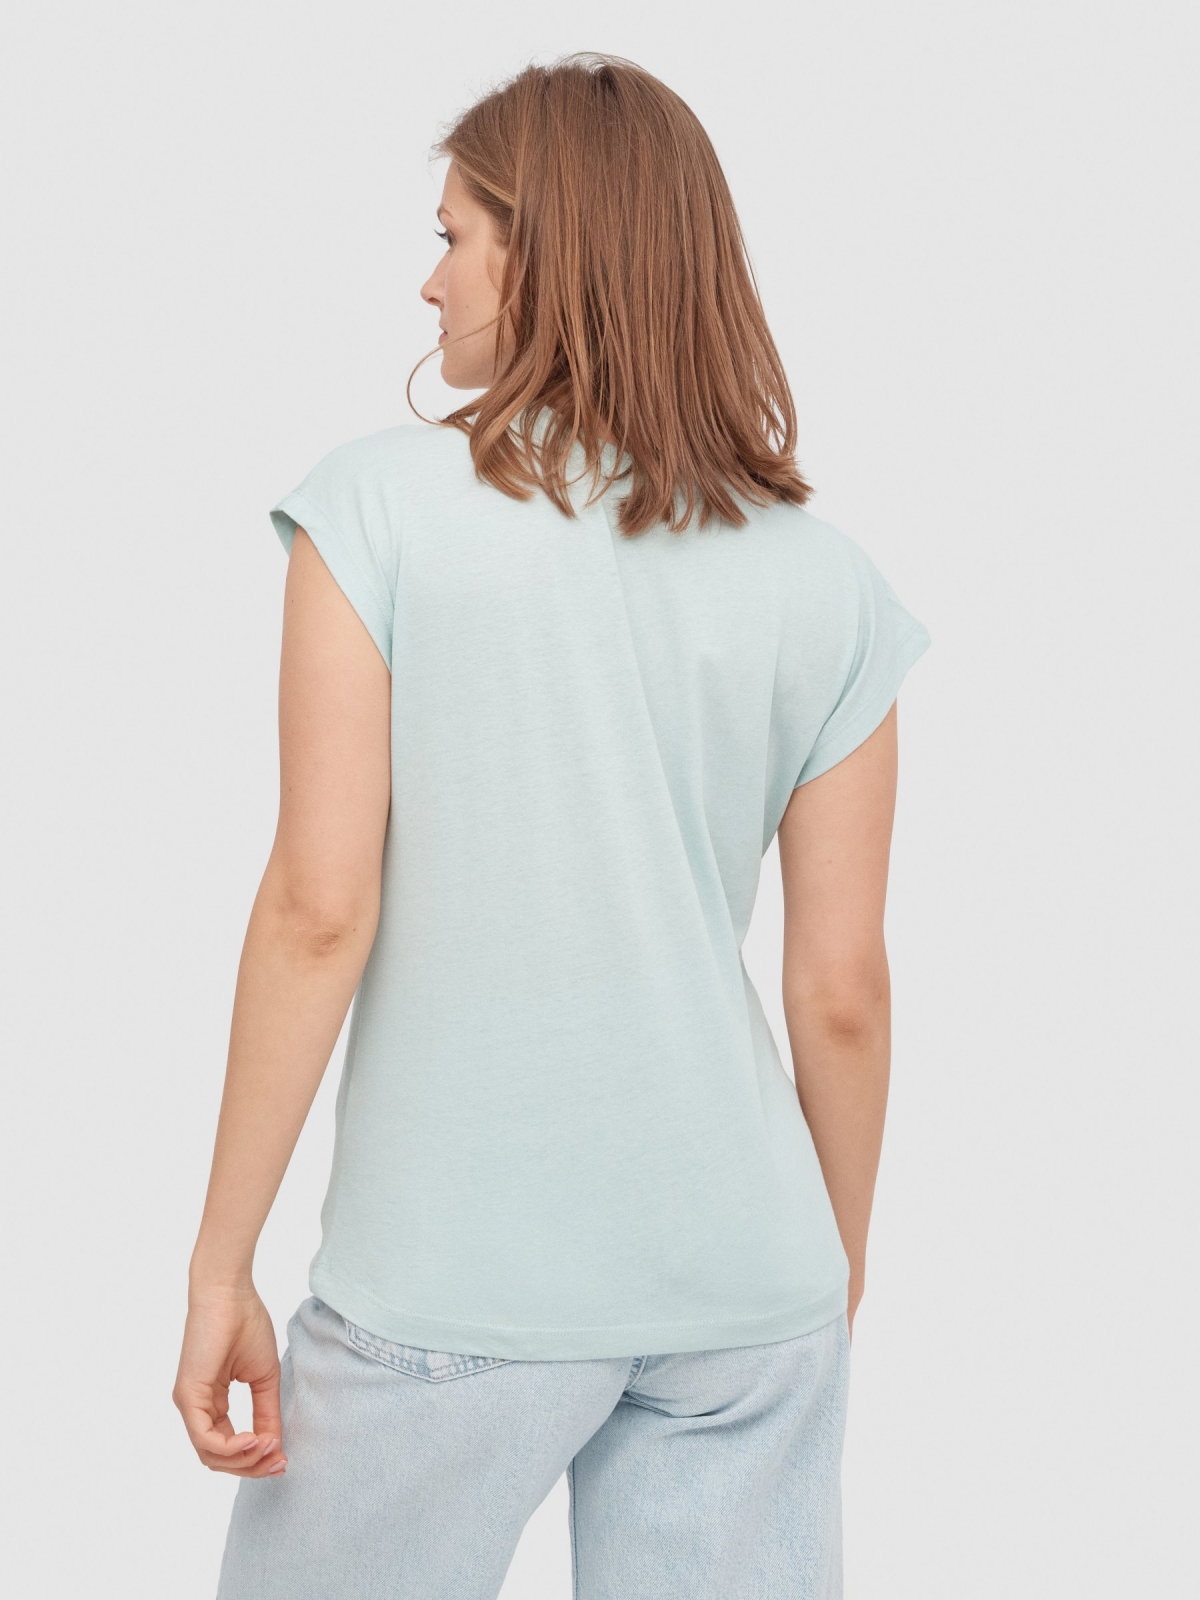 Otherwordly Party t-shirt aquamarine middle back view